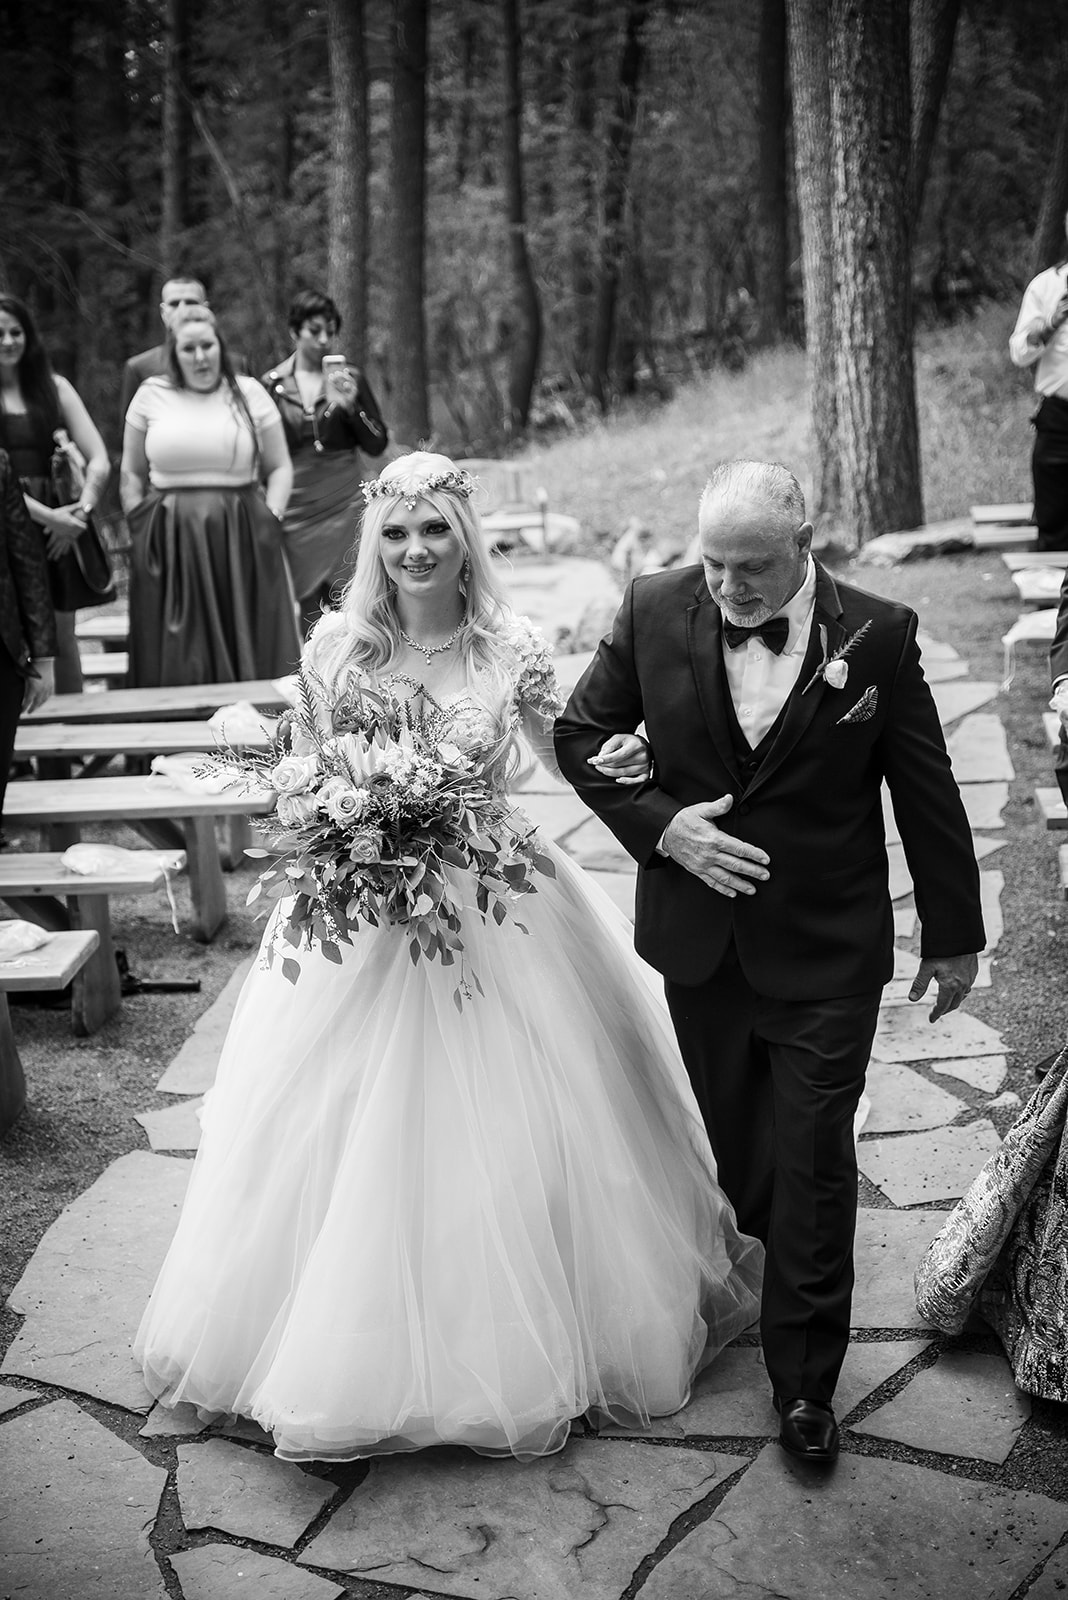 Bride's father walks her up the aisle.